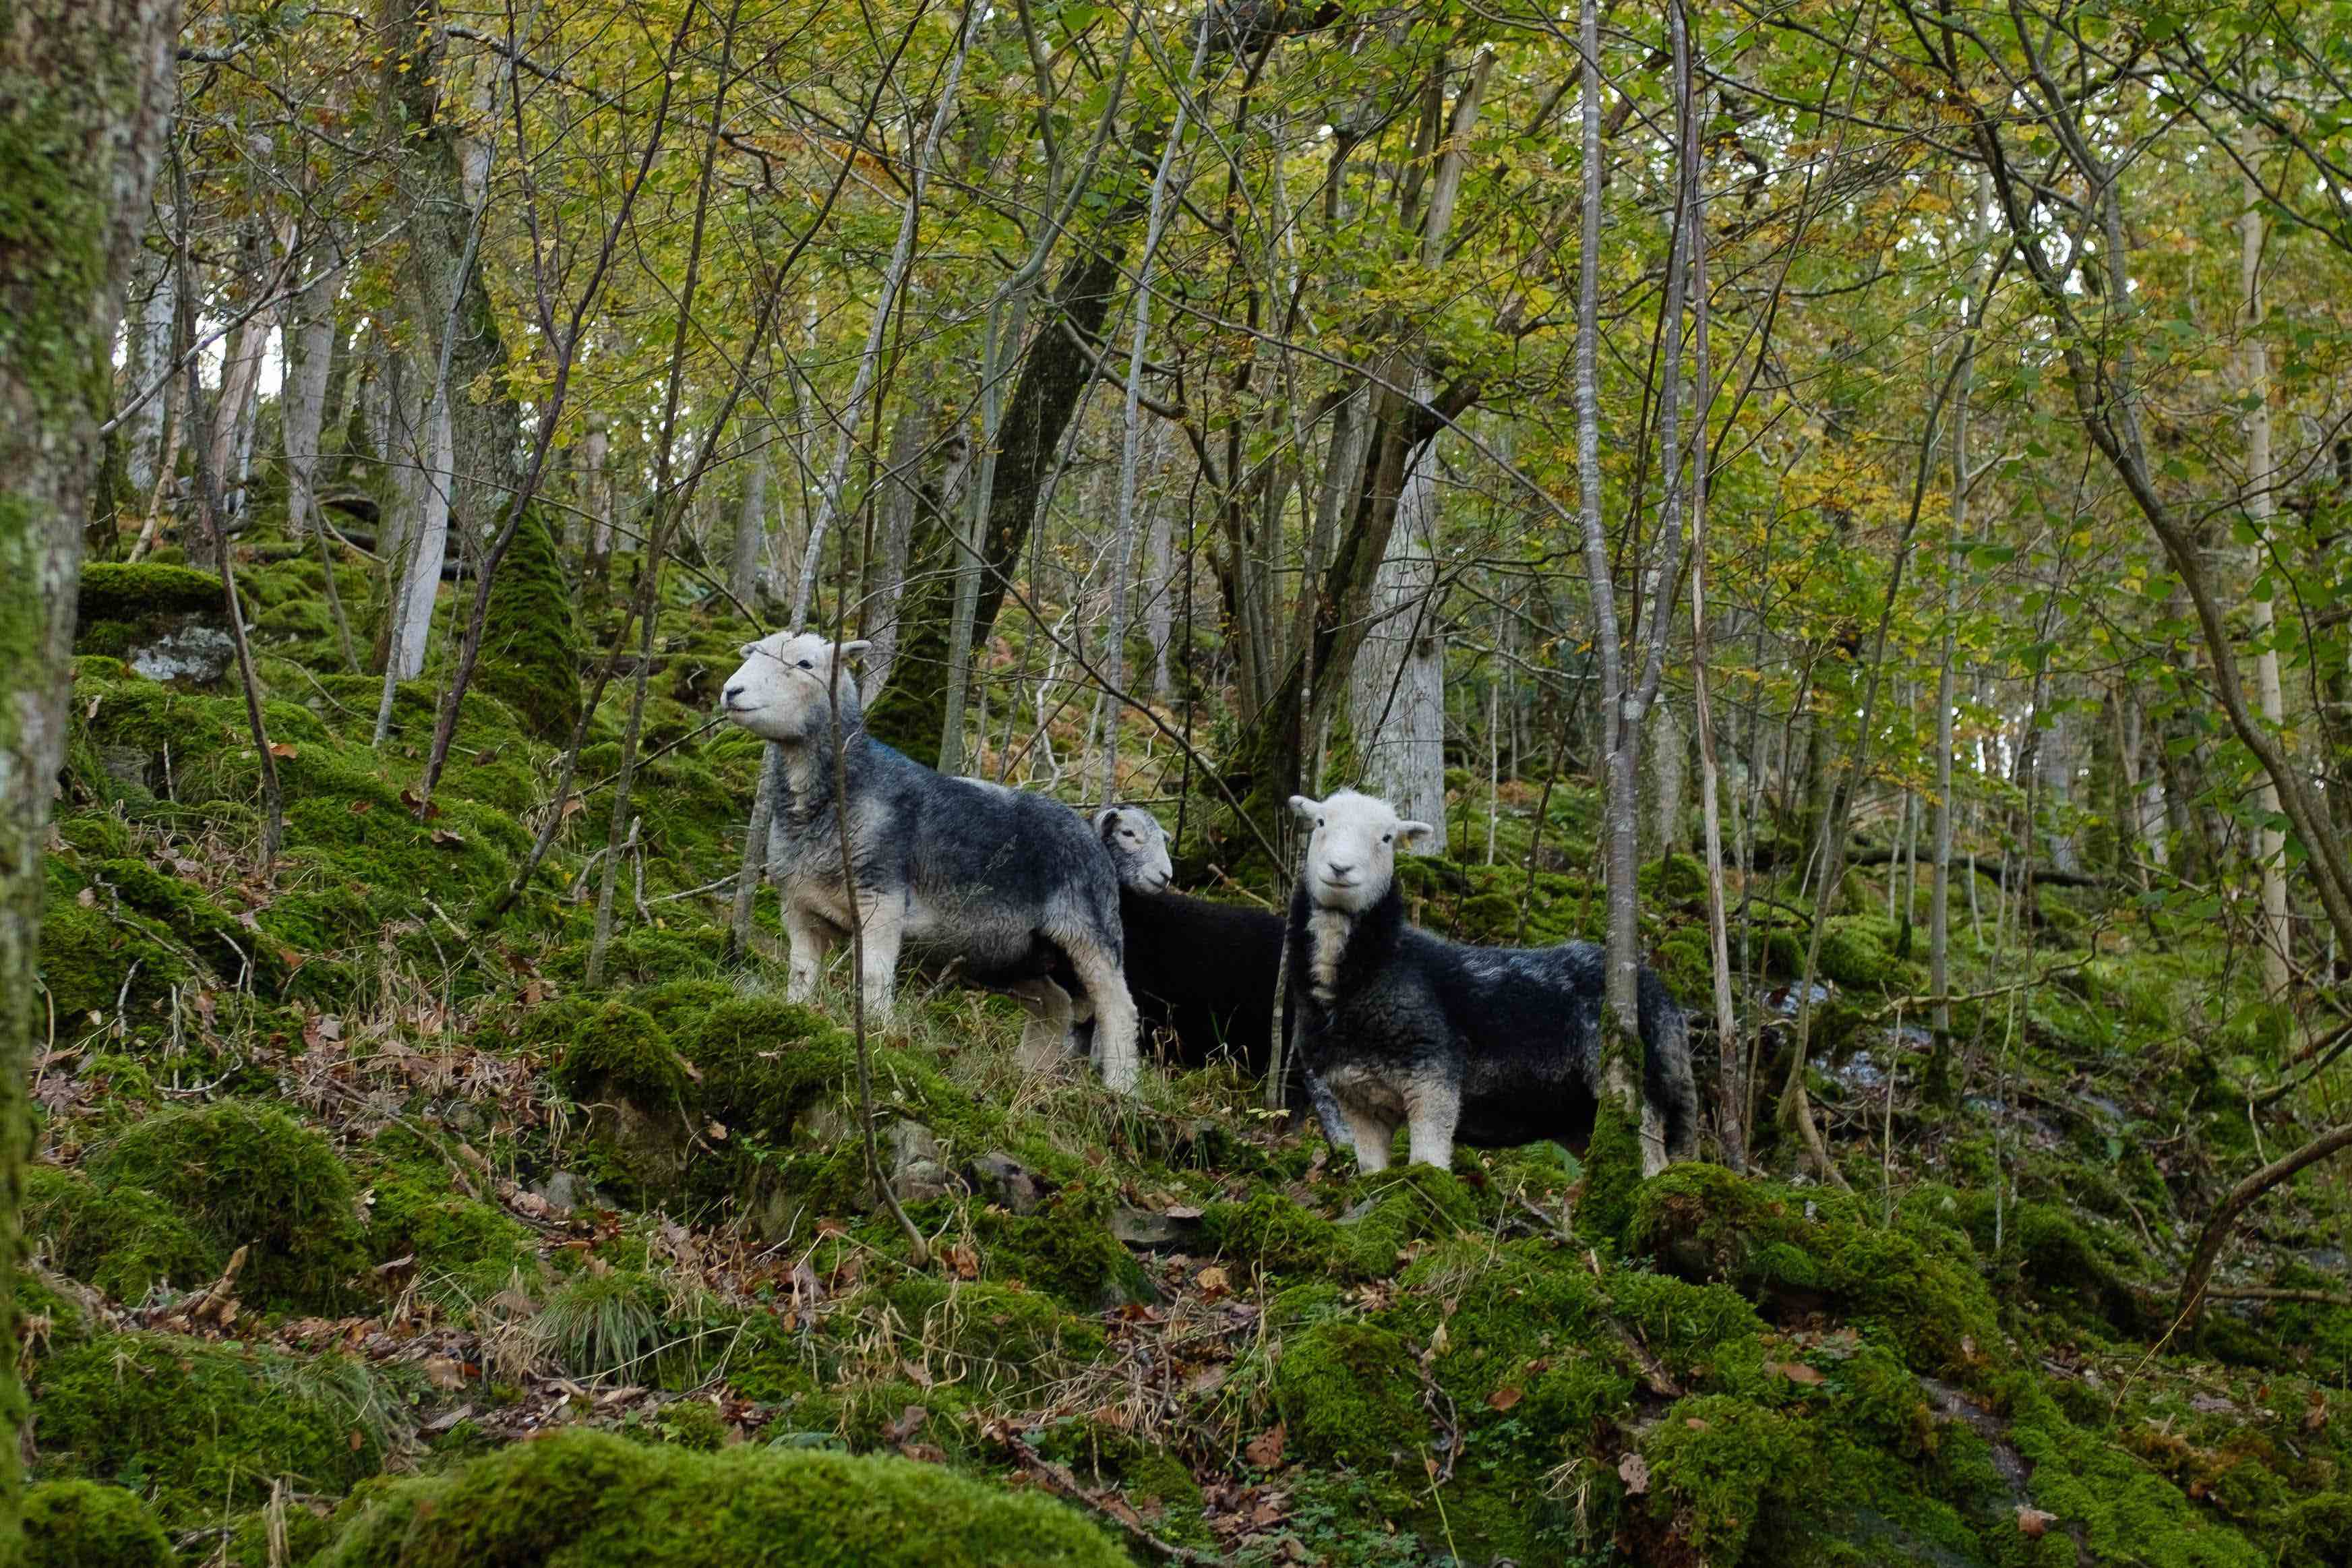 herdwick sheep with white faces and grey bodies in a green forest